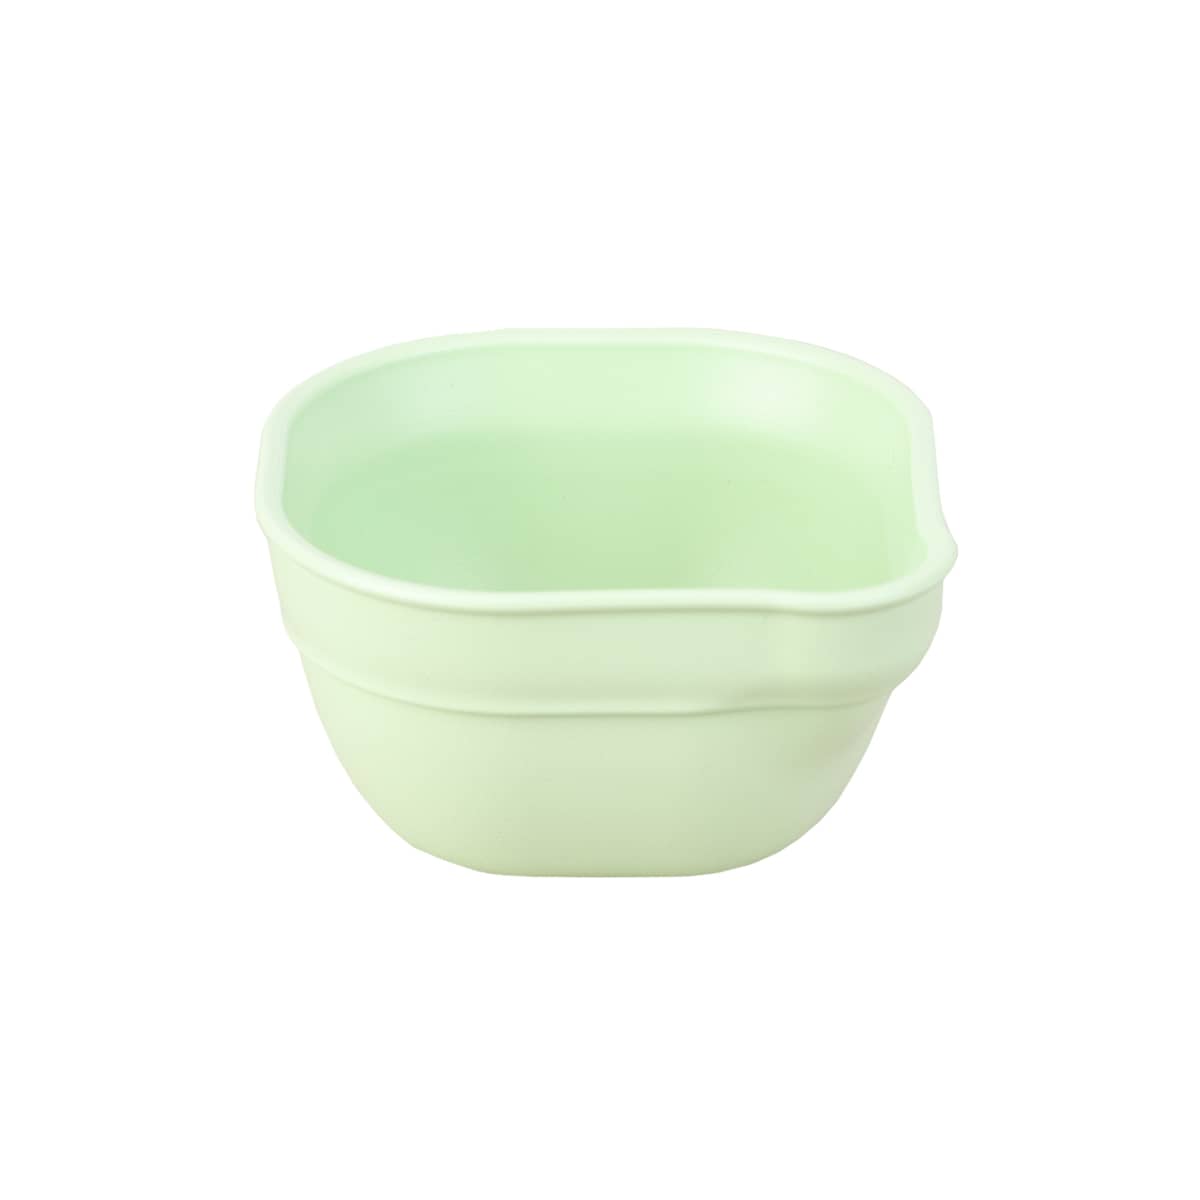 Re-Play Recycled Dip 'n' Pour Bowl - Leaf Green